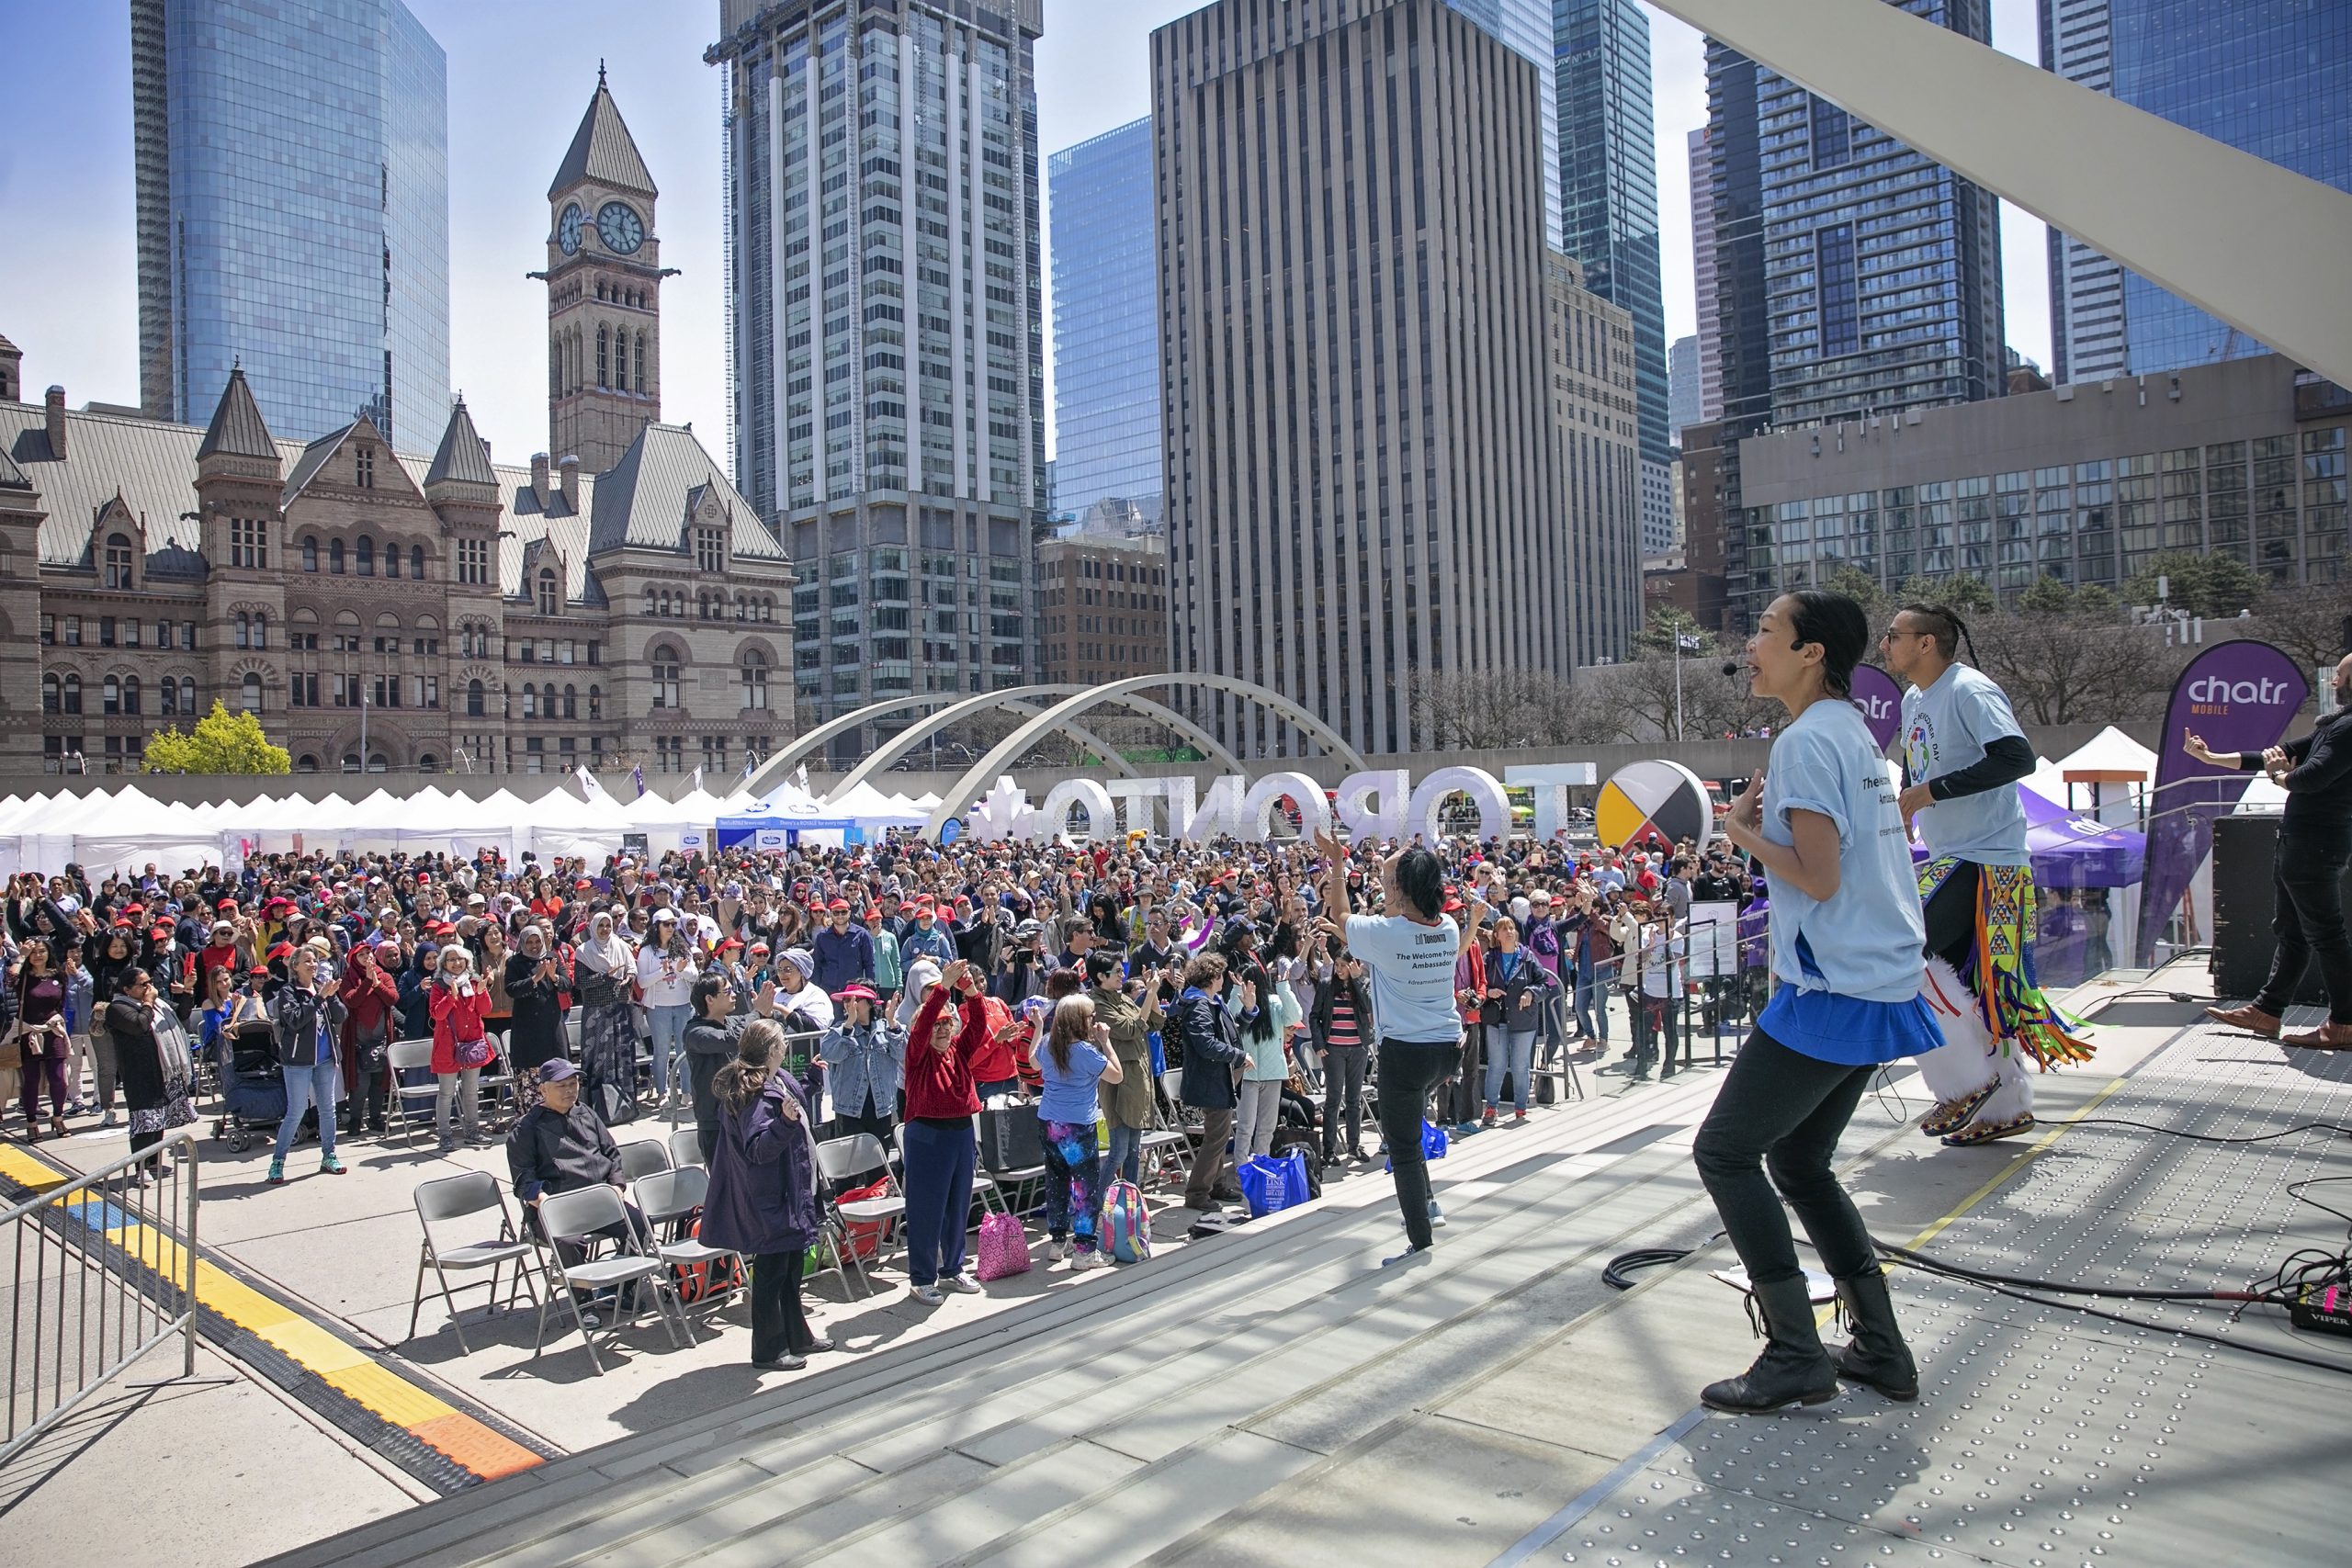 dancers on main stage at Nathan Phillips Square